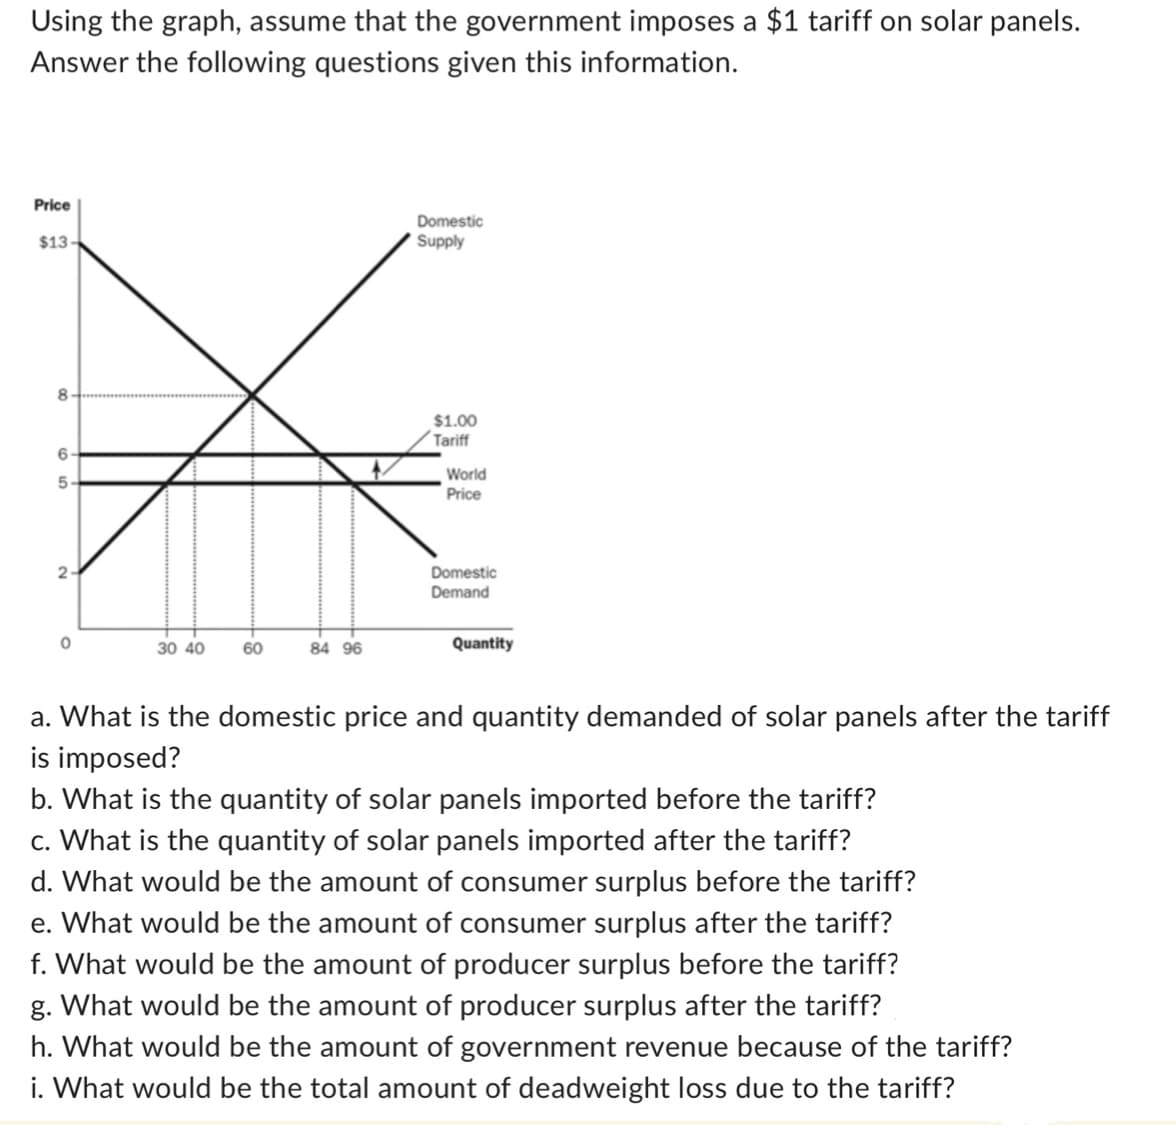 Using the graph, assume that the government imposes a $1 tariff on solar panels.
Answer the following questions given this information.
Price
$13
8
6
5
Domestic
Supply
$1.00
Tariff
World
Price
Domestic
Demand
0
30 40
60
84 96
Quantity
a. What is the domestic price and quantity demanded of solar panels after the tariff
is imposed?
b. What is the quantity of solar panels imported before the tariff?
c. What is the quantity of solar panels imported after the tariff?
d. What would be the amount of consumer surplus before the tariff?
e. What would be the amount of consumer surplus after the tariff?
f. What would be the amount of producer surplus before the tariff?
g. What would be the amount of producer surplus after the tariff?
h. What would be the amount of government revenue because of the tariff?
i. What would be the total amount of deadweight loss due to the tariff?